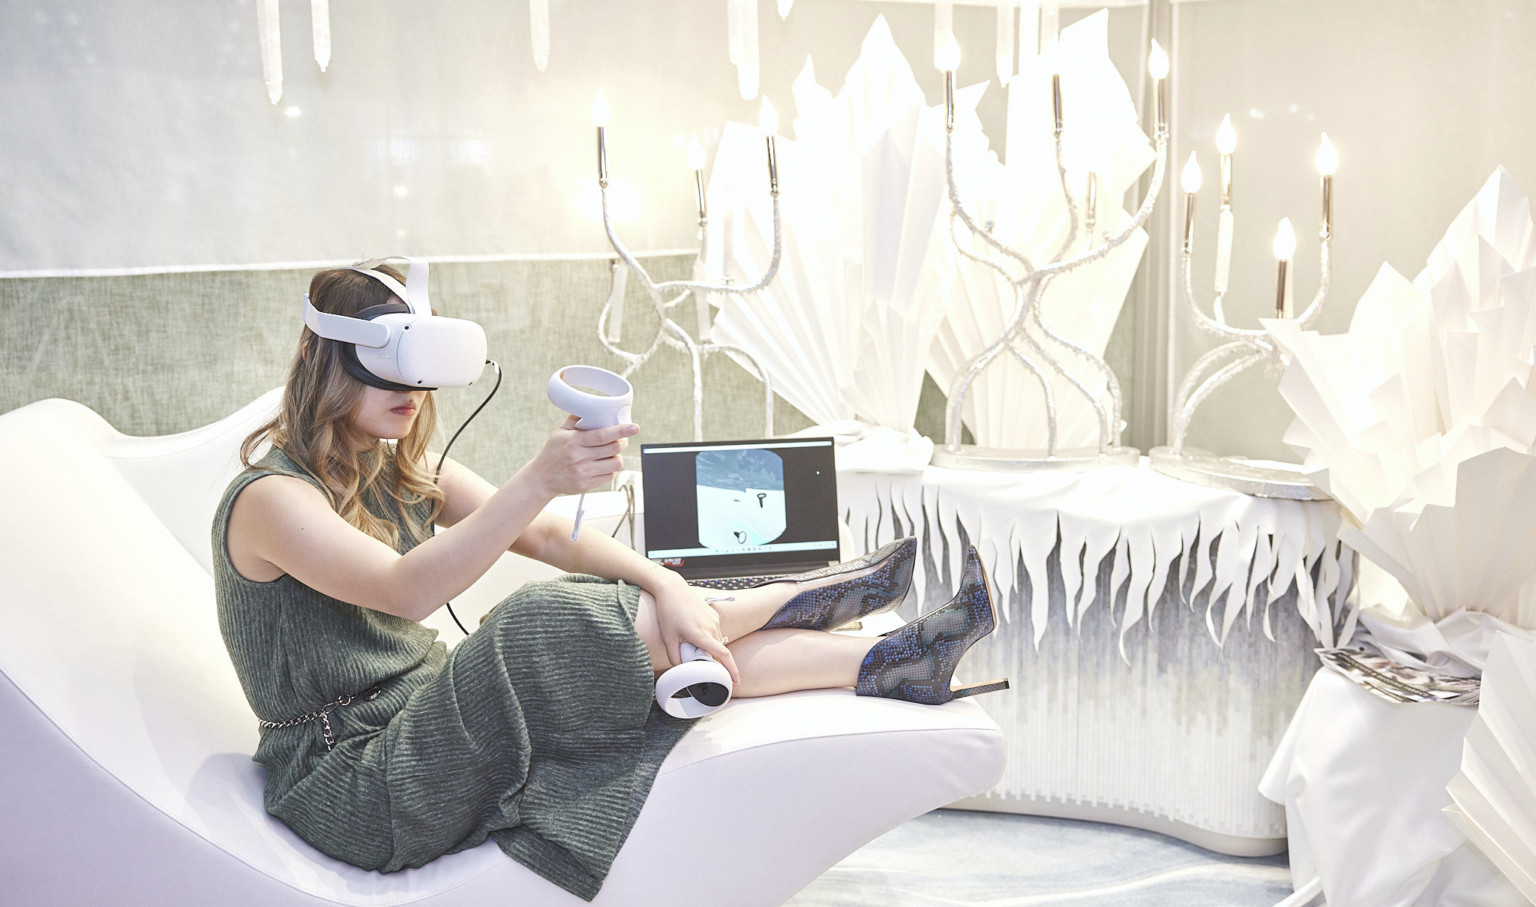 Woman uses virtual reality in all white wintery room with ice shard style sculptures and organically curving candelabra lights